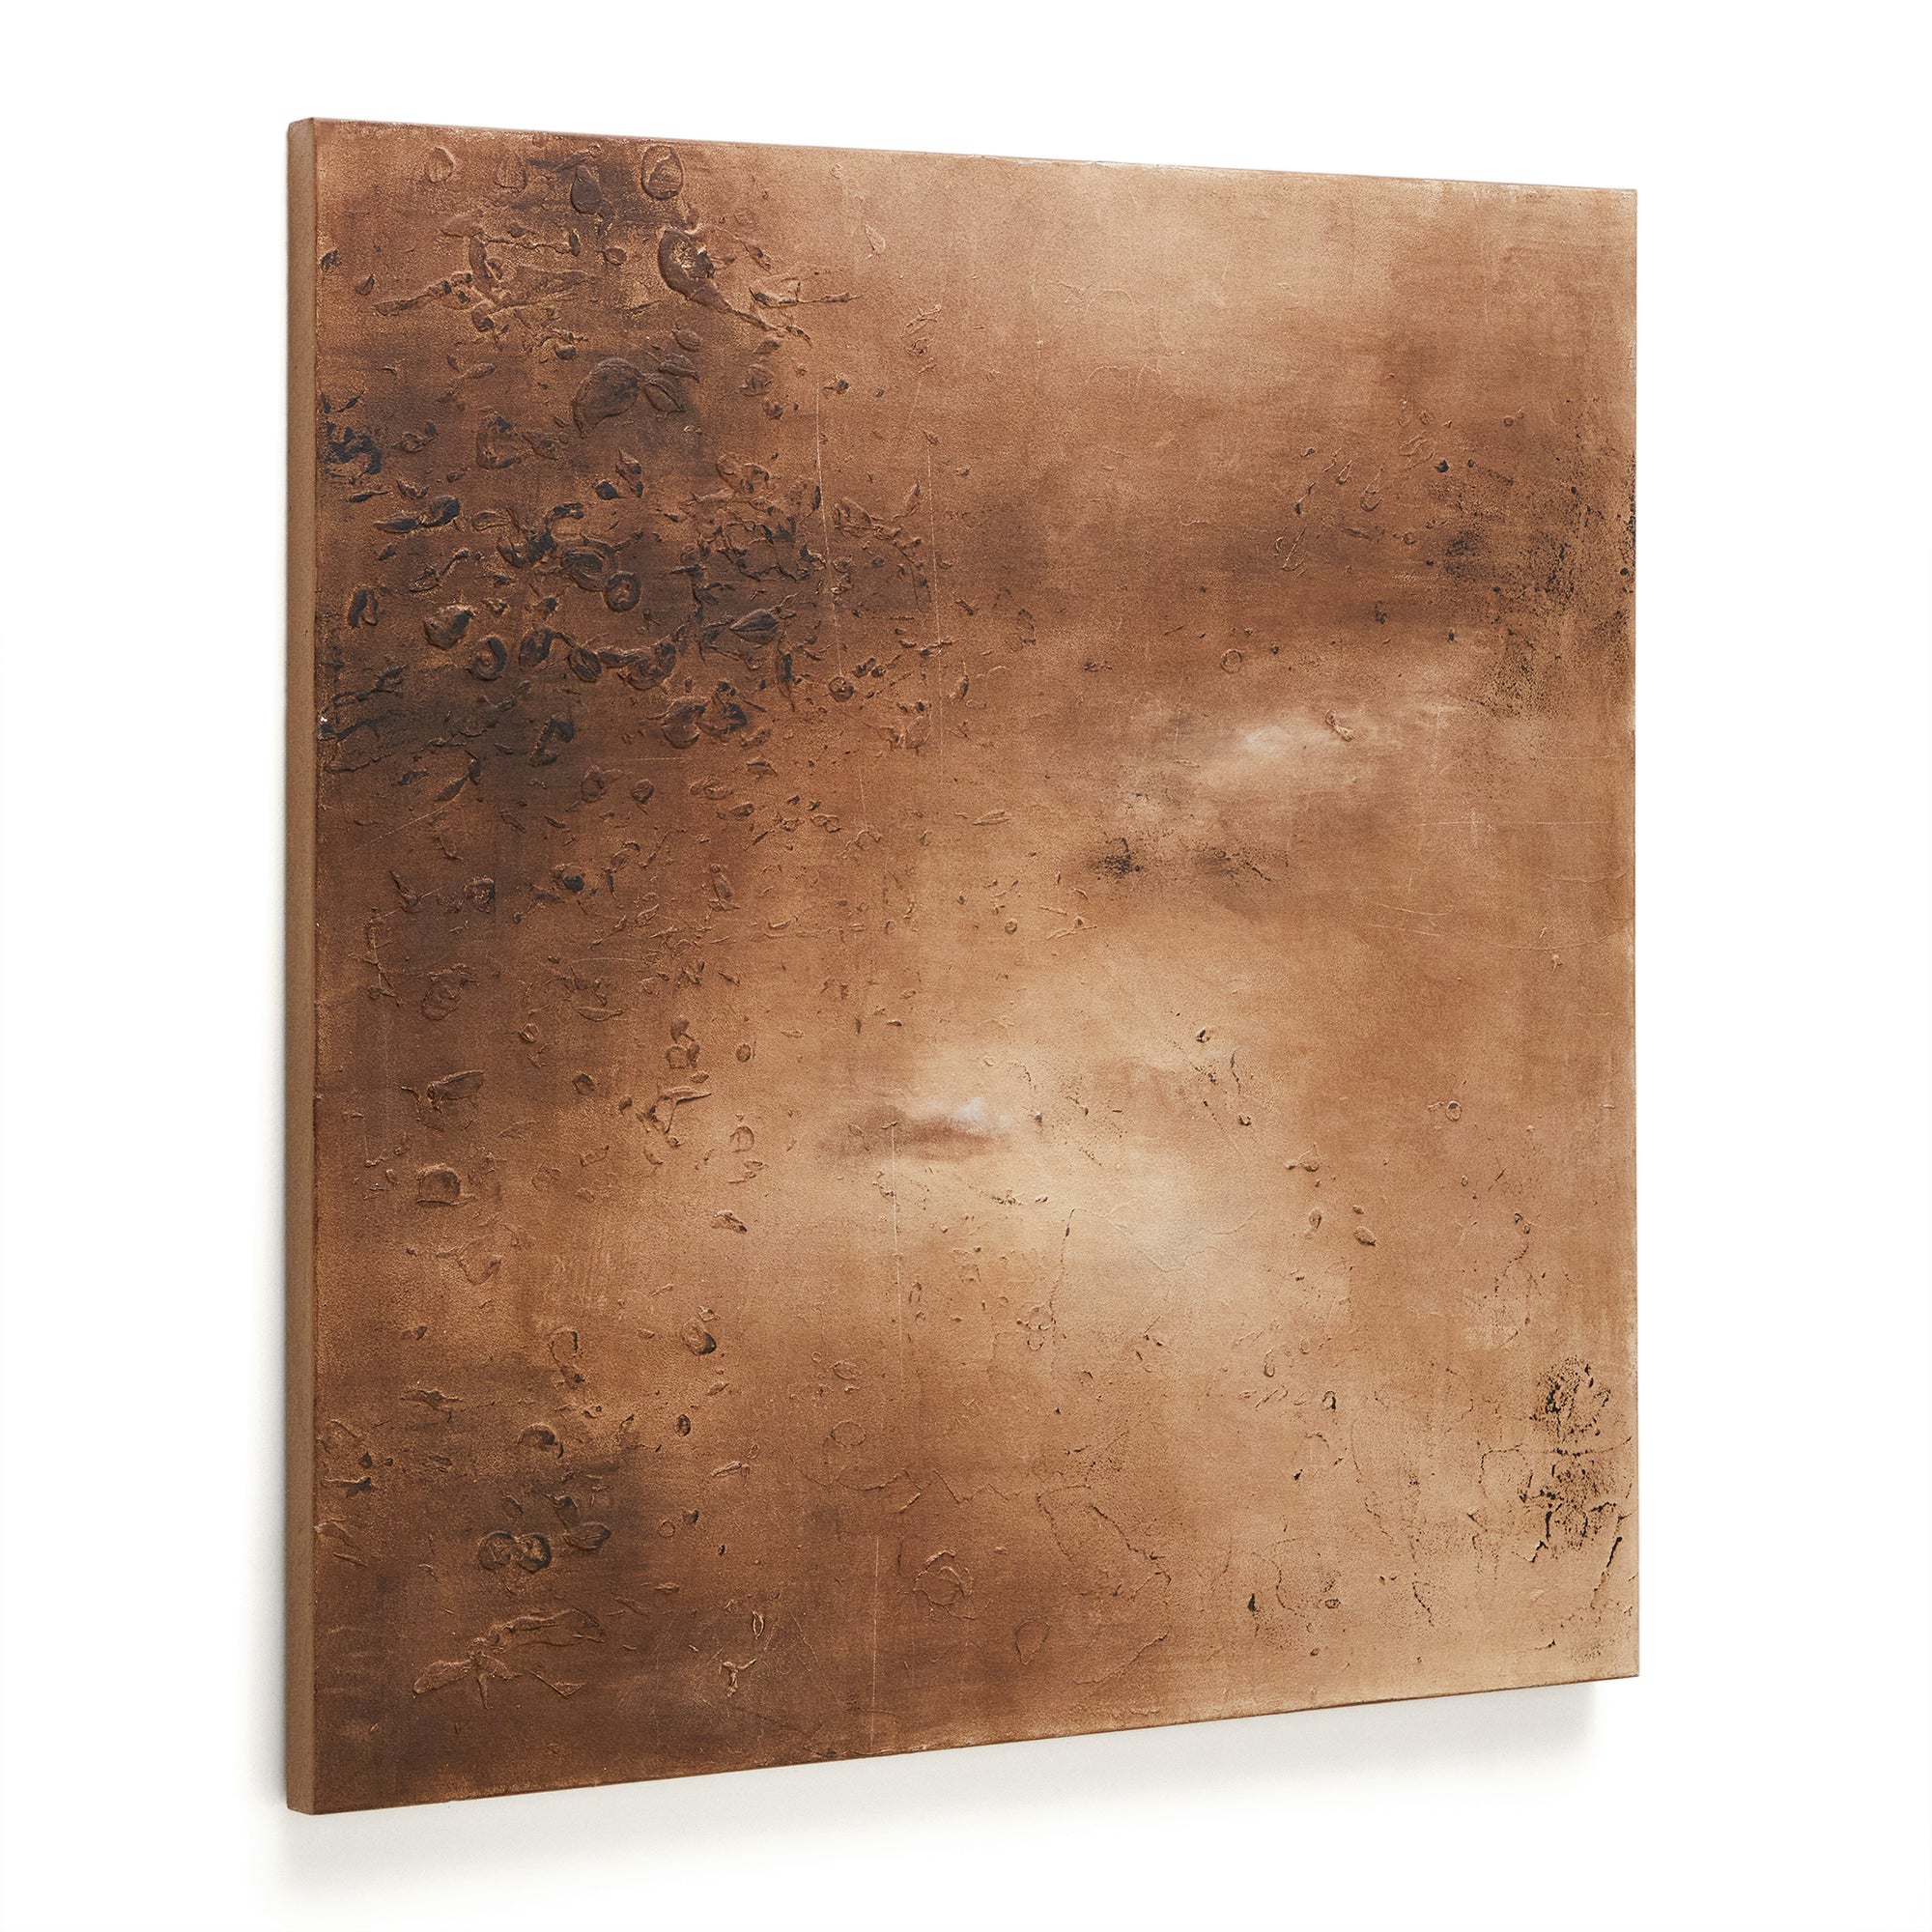 Sabira abstract canvas in oxidized copper 100 x 100 cm